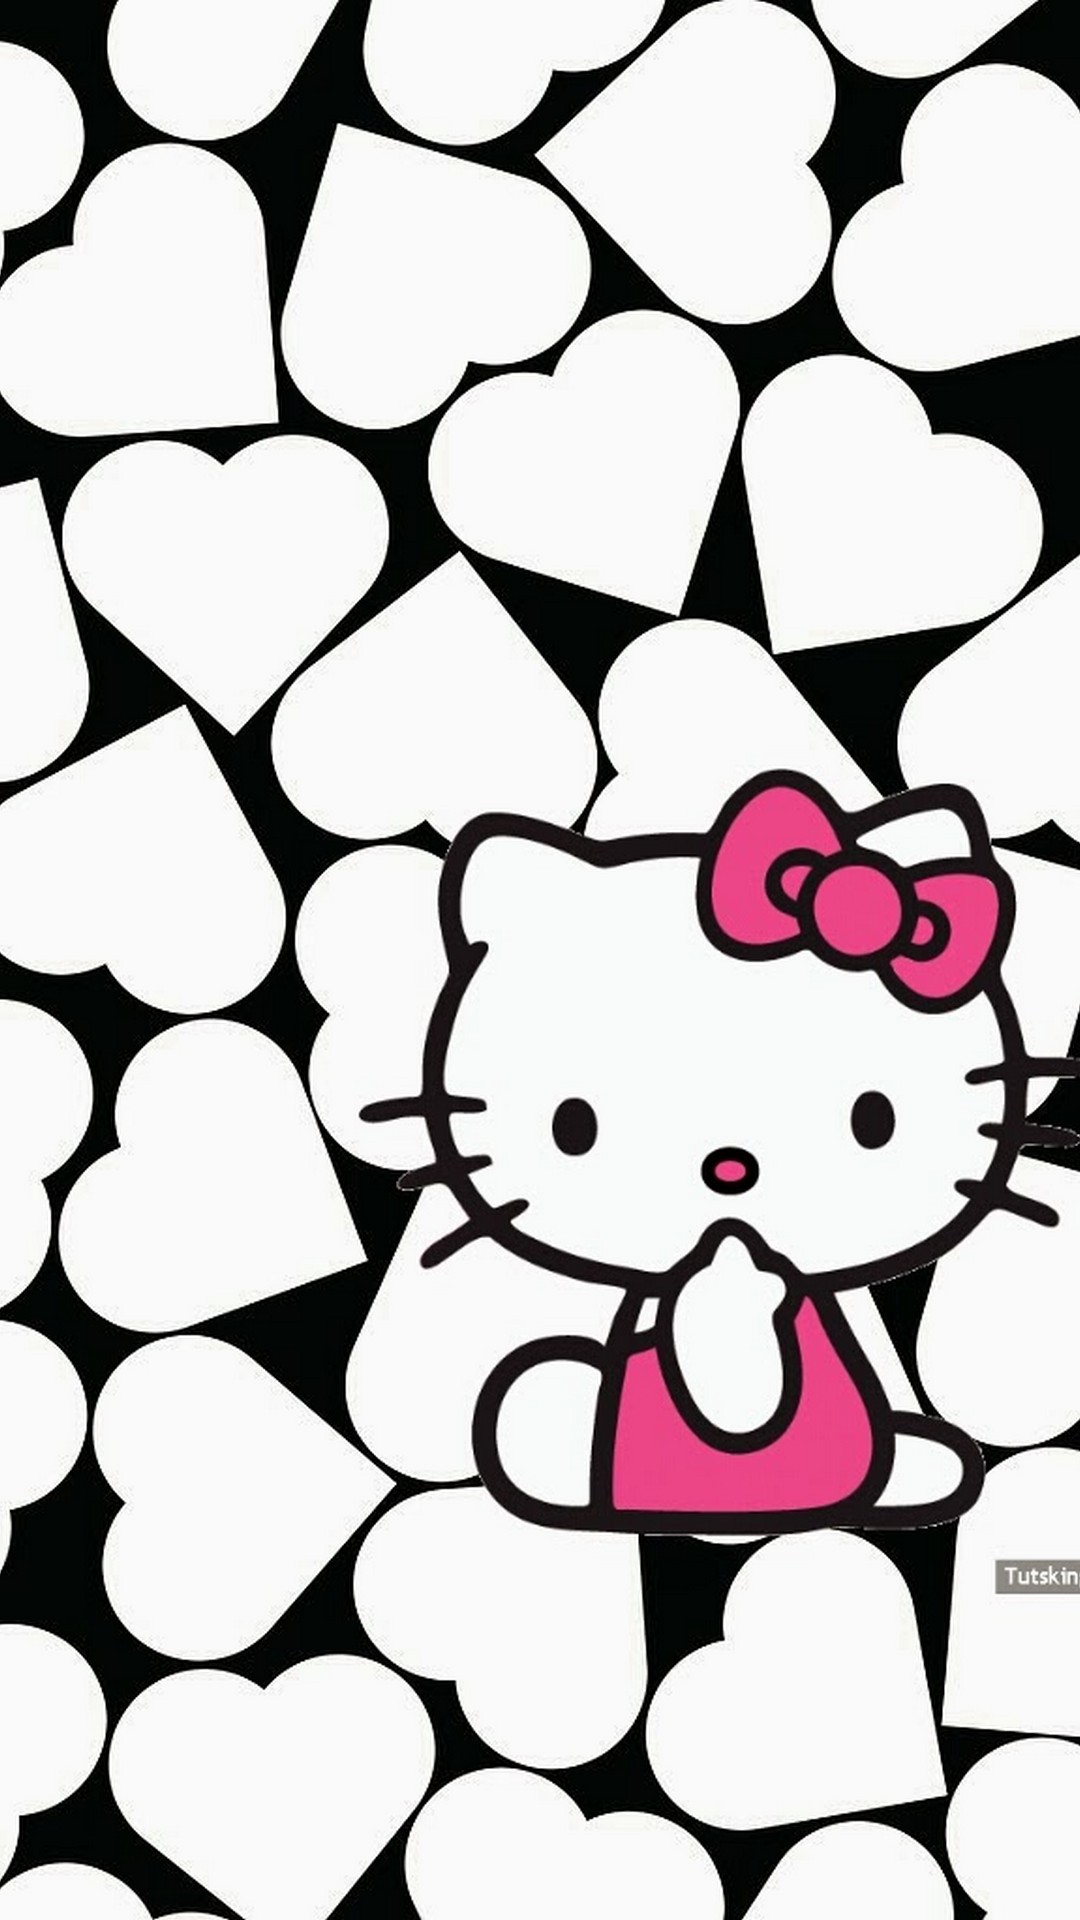 Kitty Wallpaper For Android with image resolution 1080x1920 pixel. You can make this wallpaper for your Android backgrounds, Tablet, Smartphones Screensavers and Mobile Phone Lock Screen